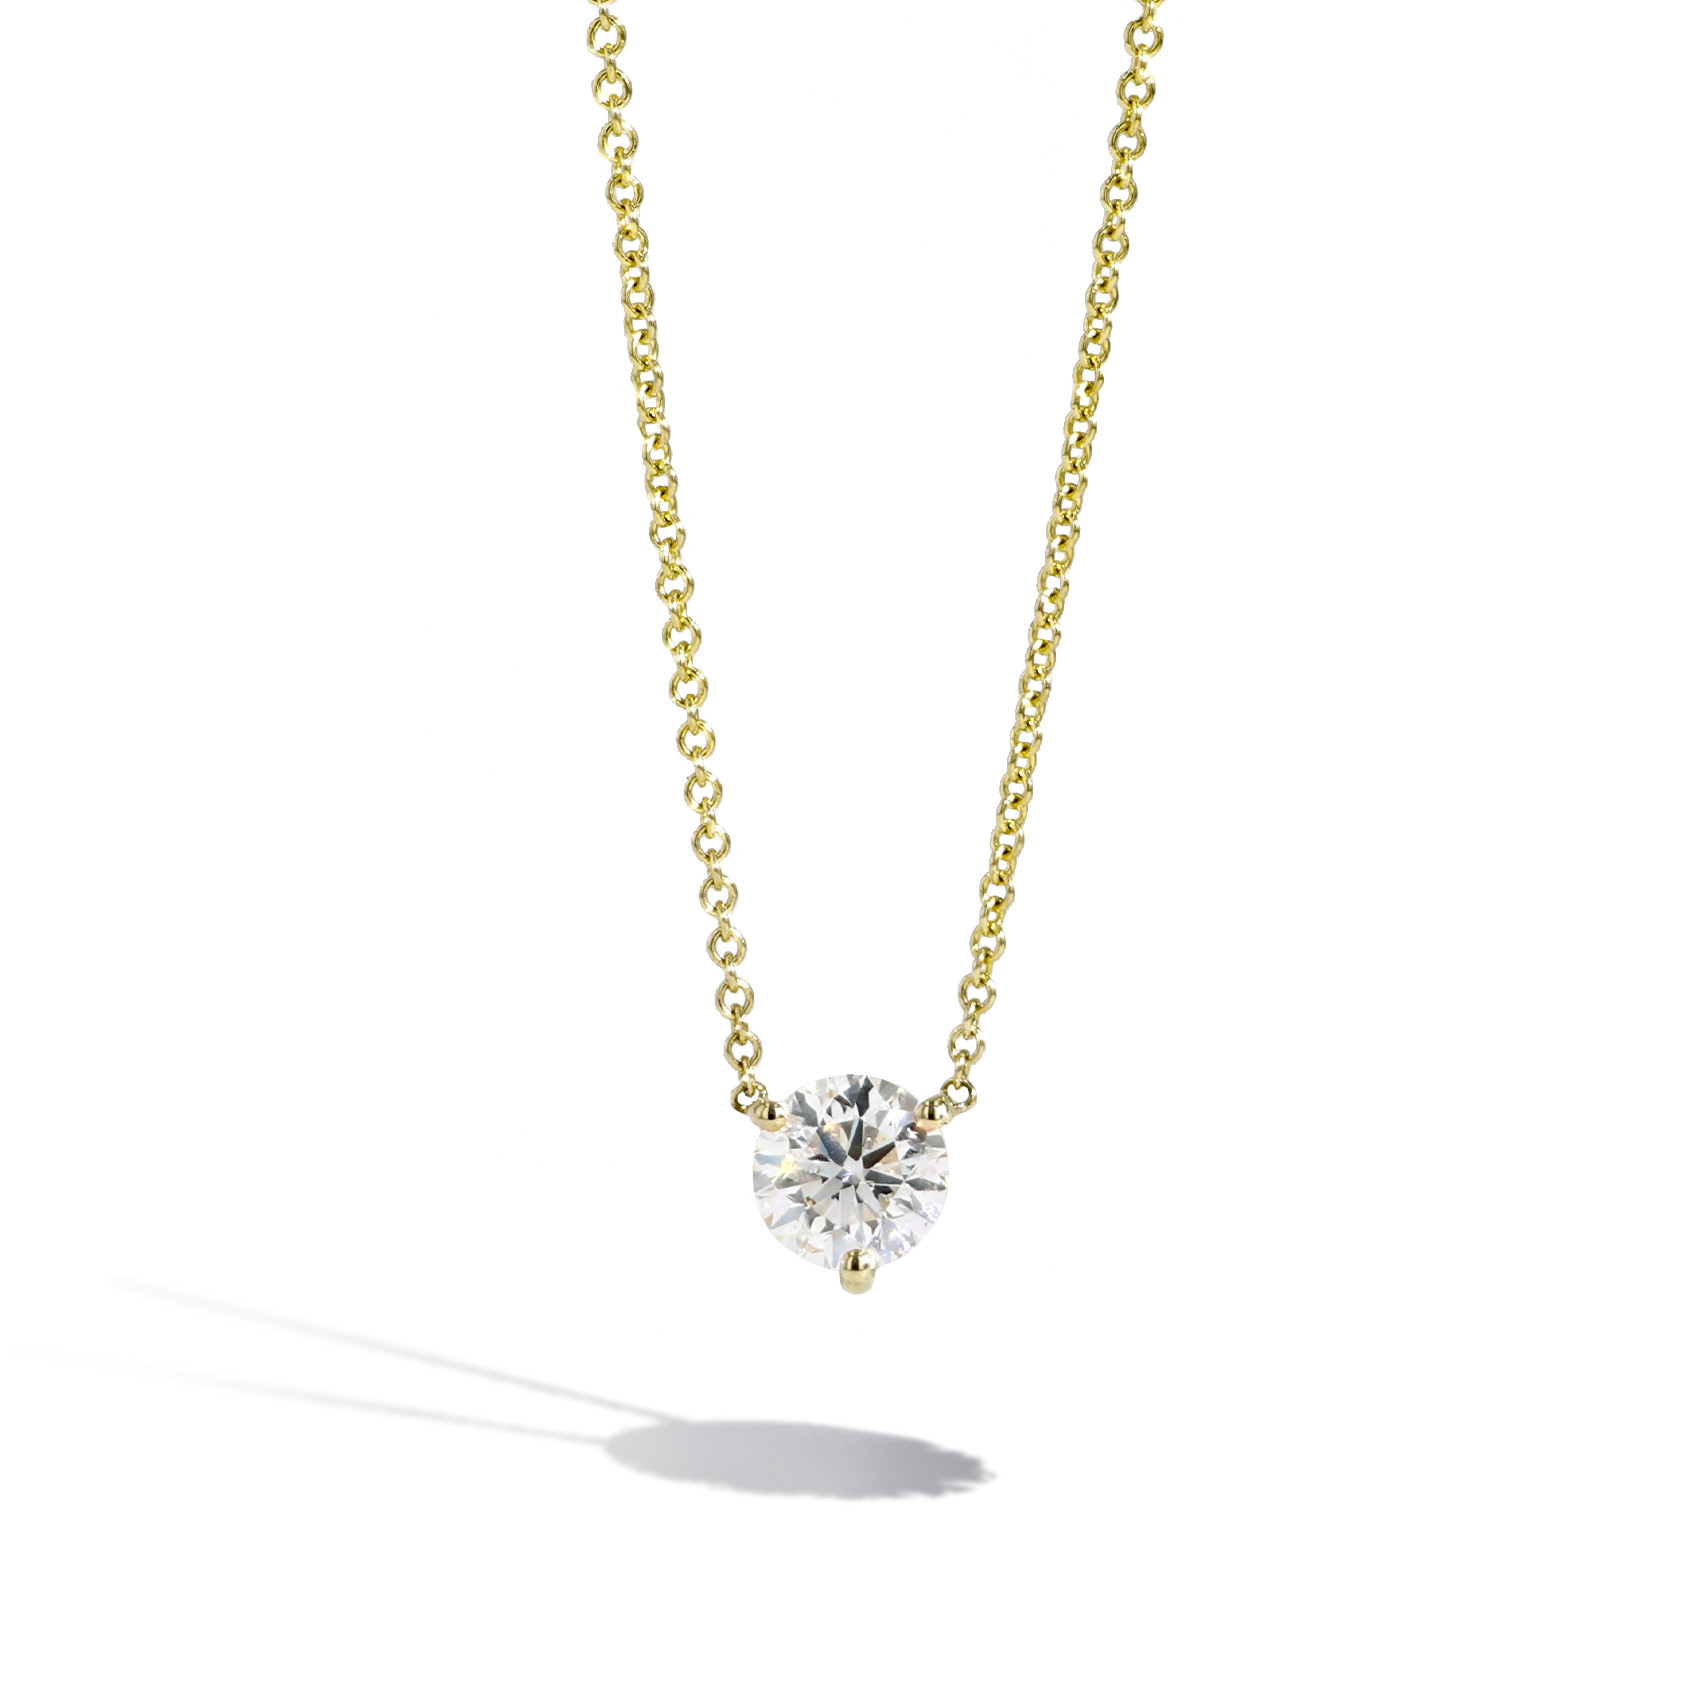 Diamond Solitaire Necklace Gold Hotsell, 58% OFF | www 